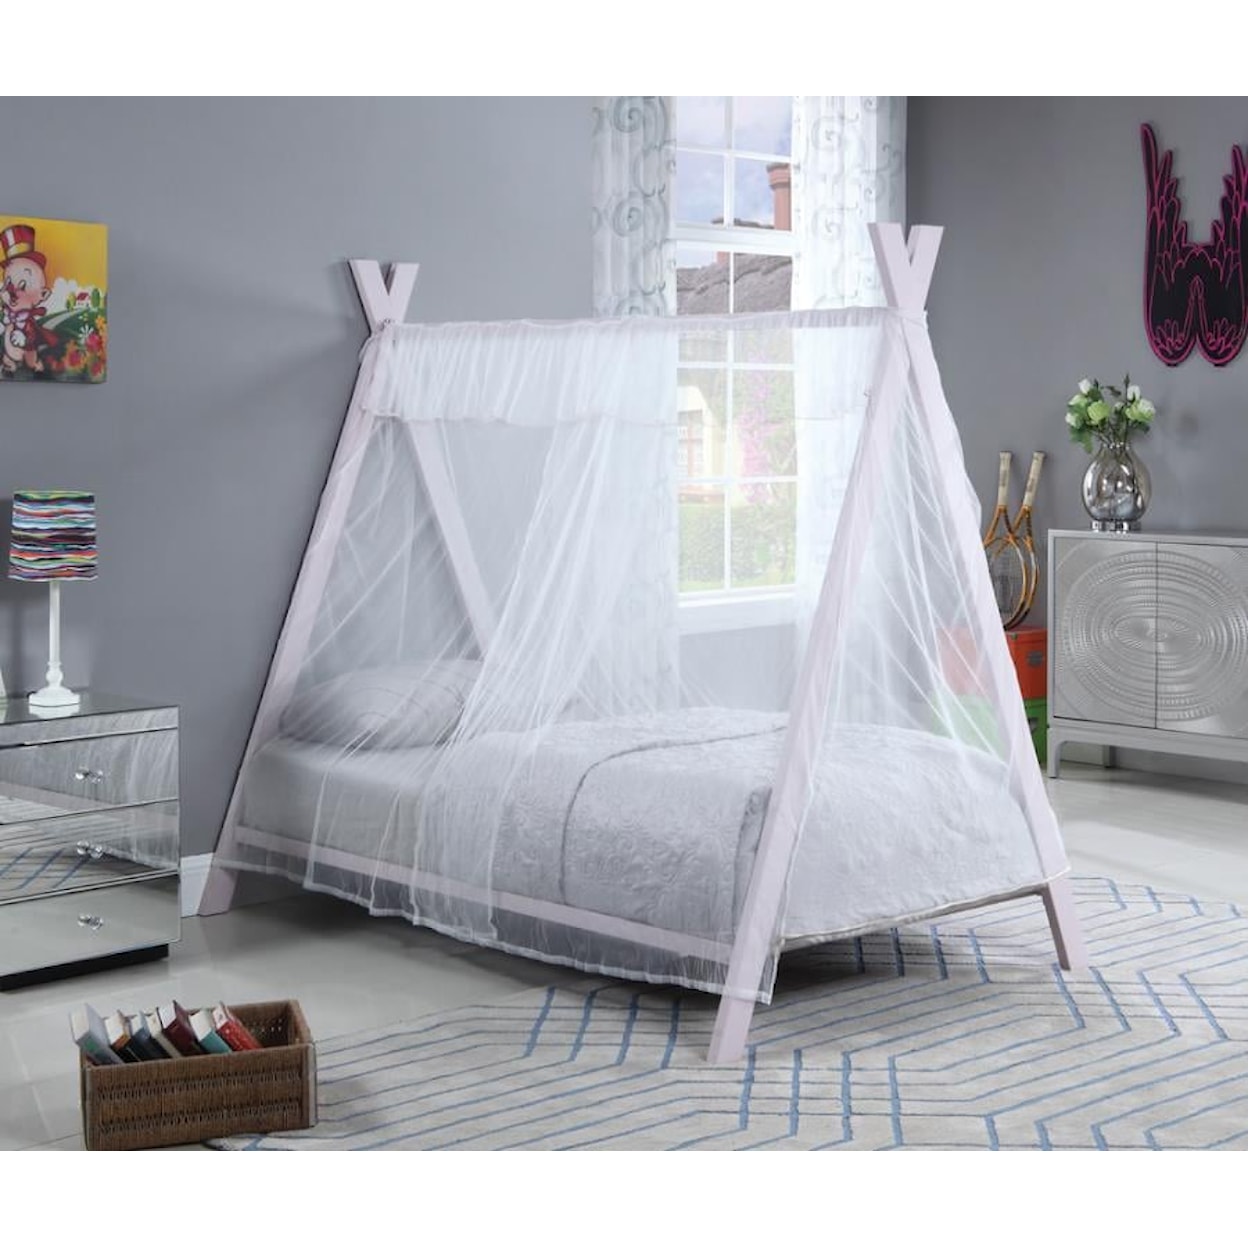 Coaster Tent Bed TWIN WHITE TENT BED |